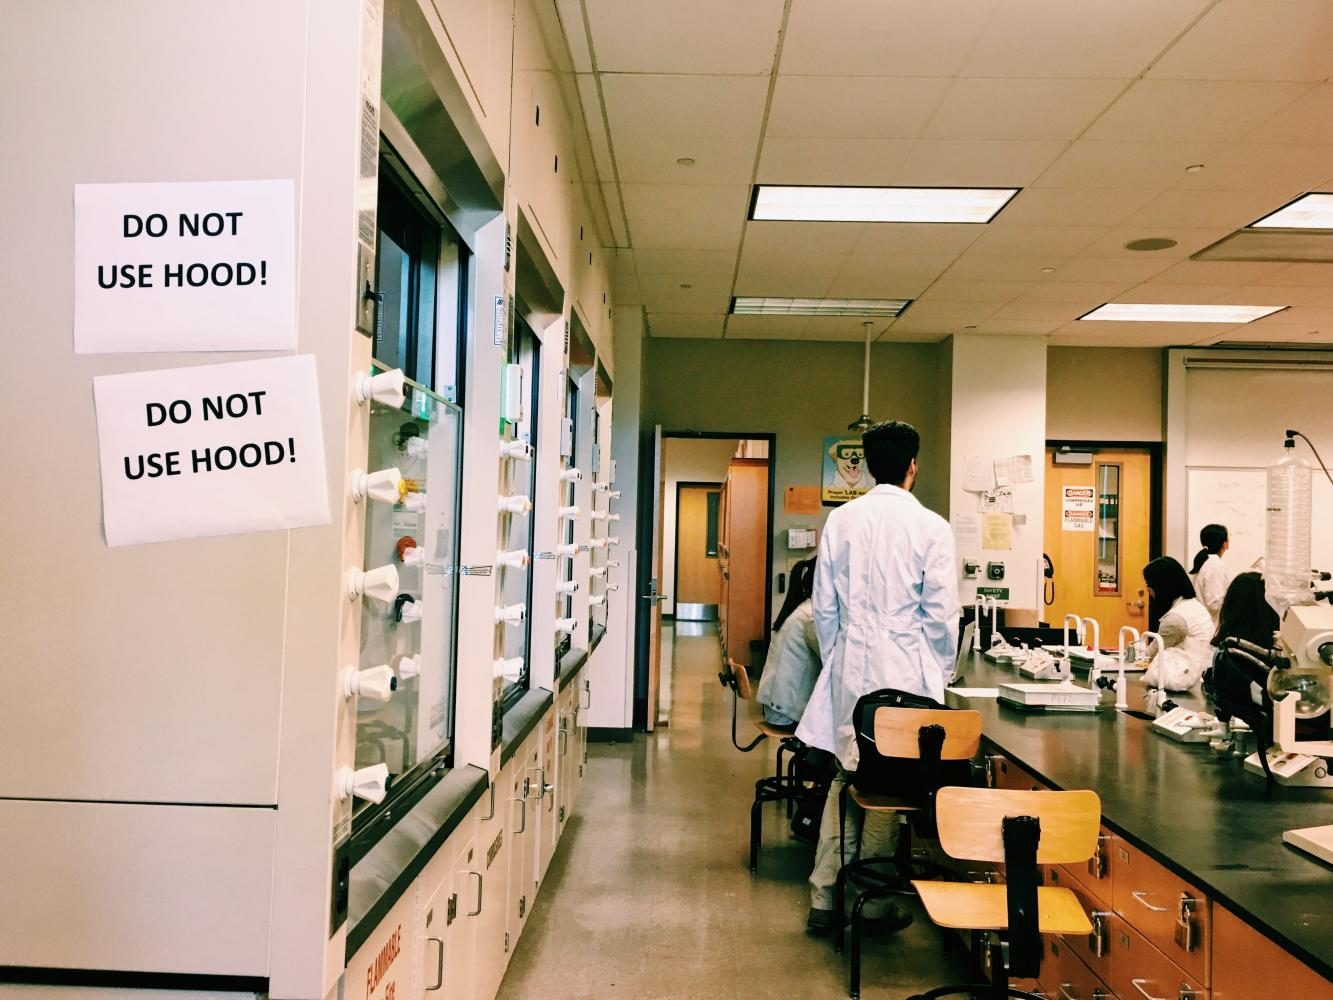 Signs warn students about danger of exposure to broken hoods in the science labs of San jose City Colleges science building Wednesday, May 3.